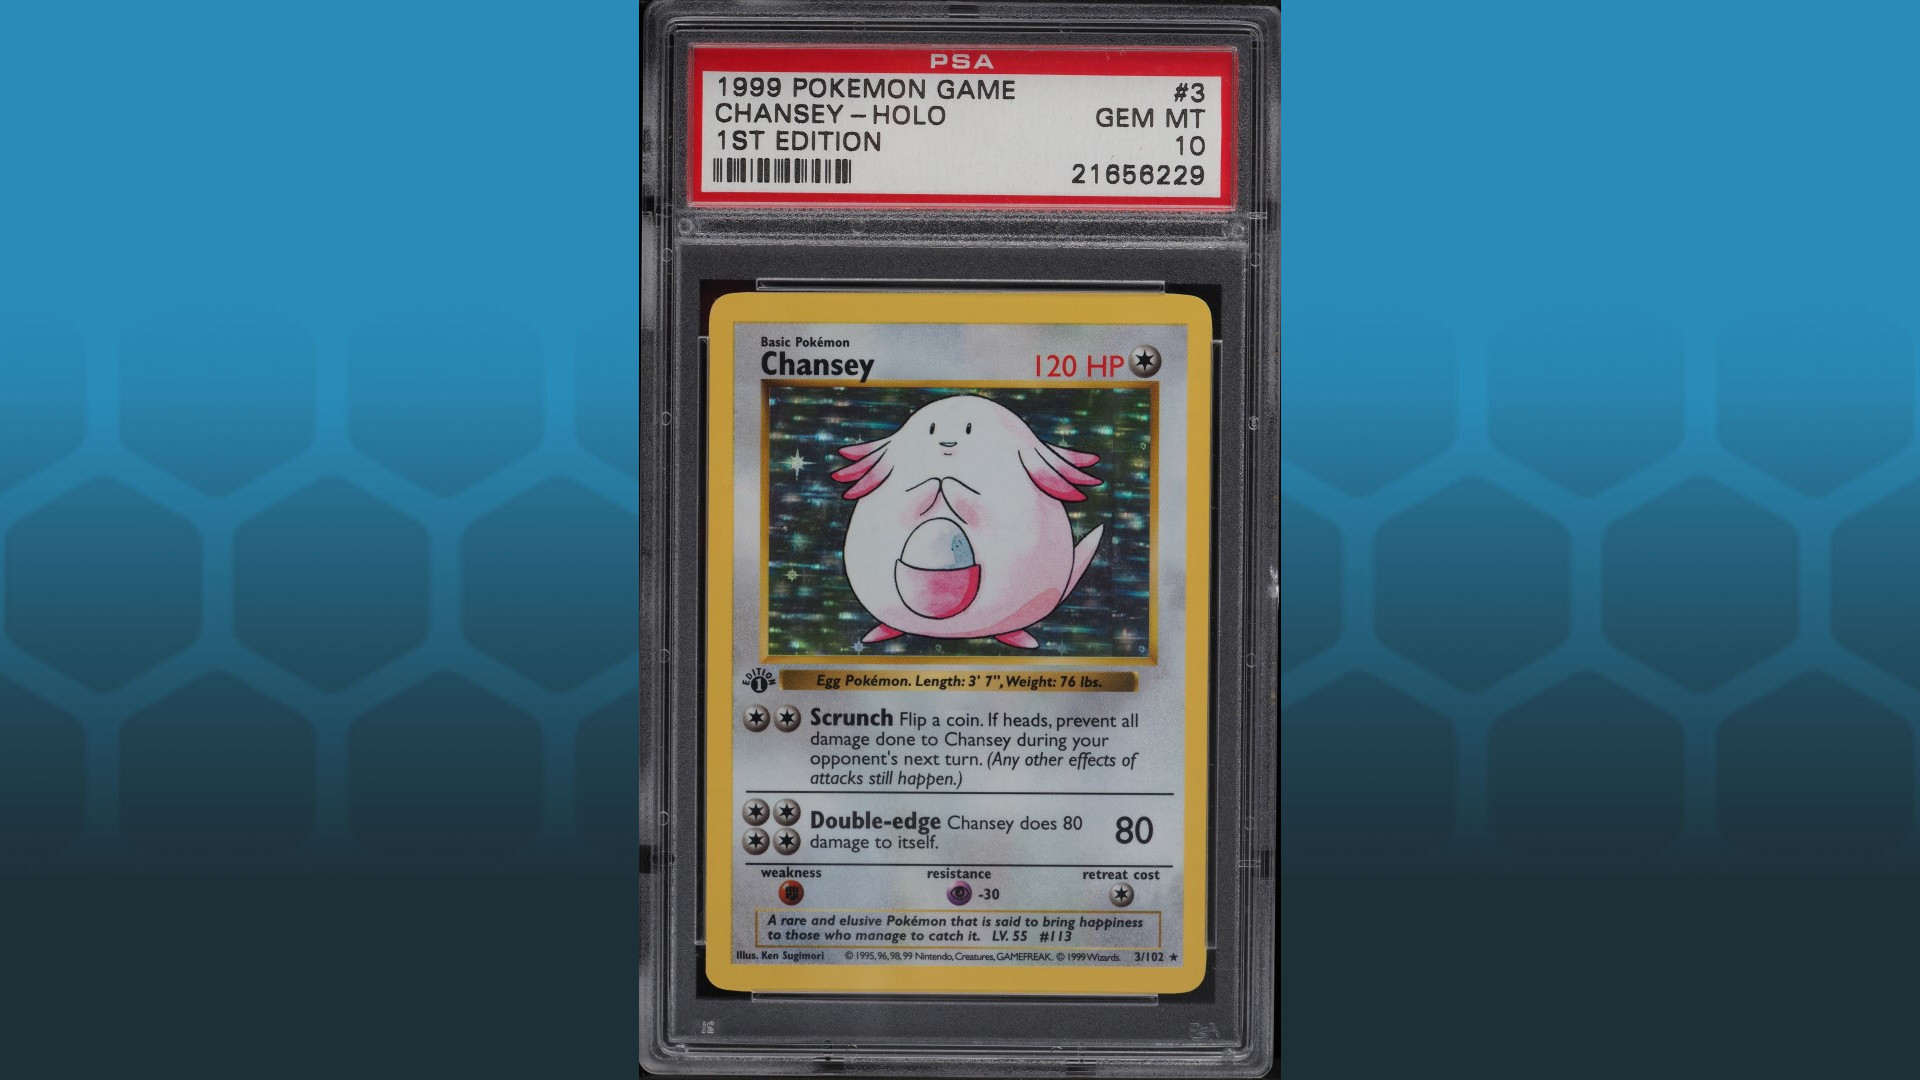 The 10 Most Expensive Gold Rare Pokémon Cards